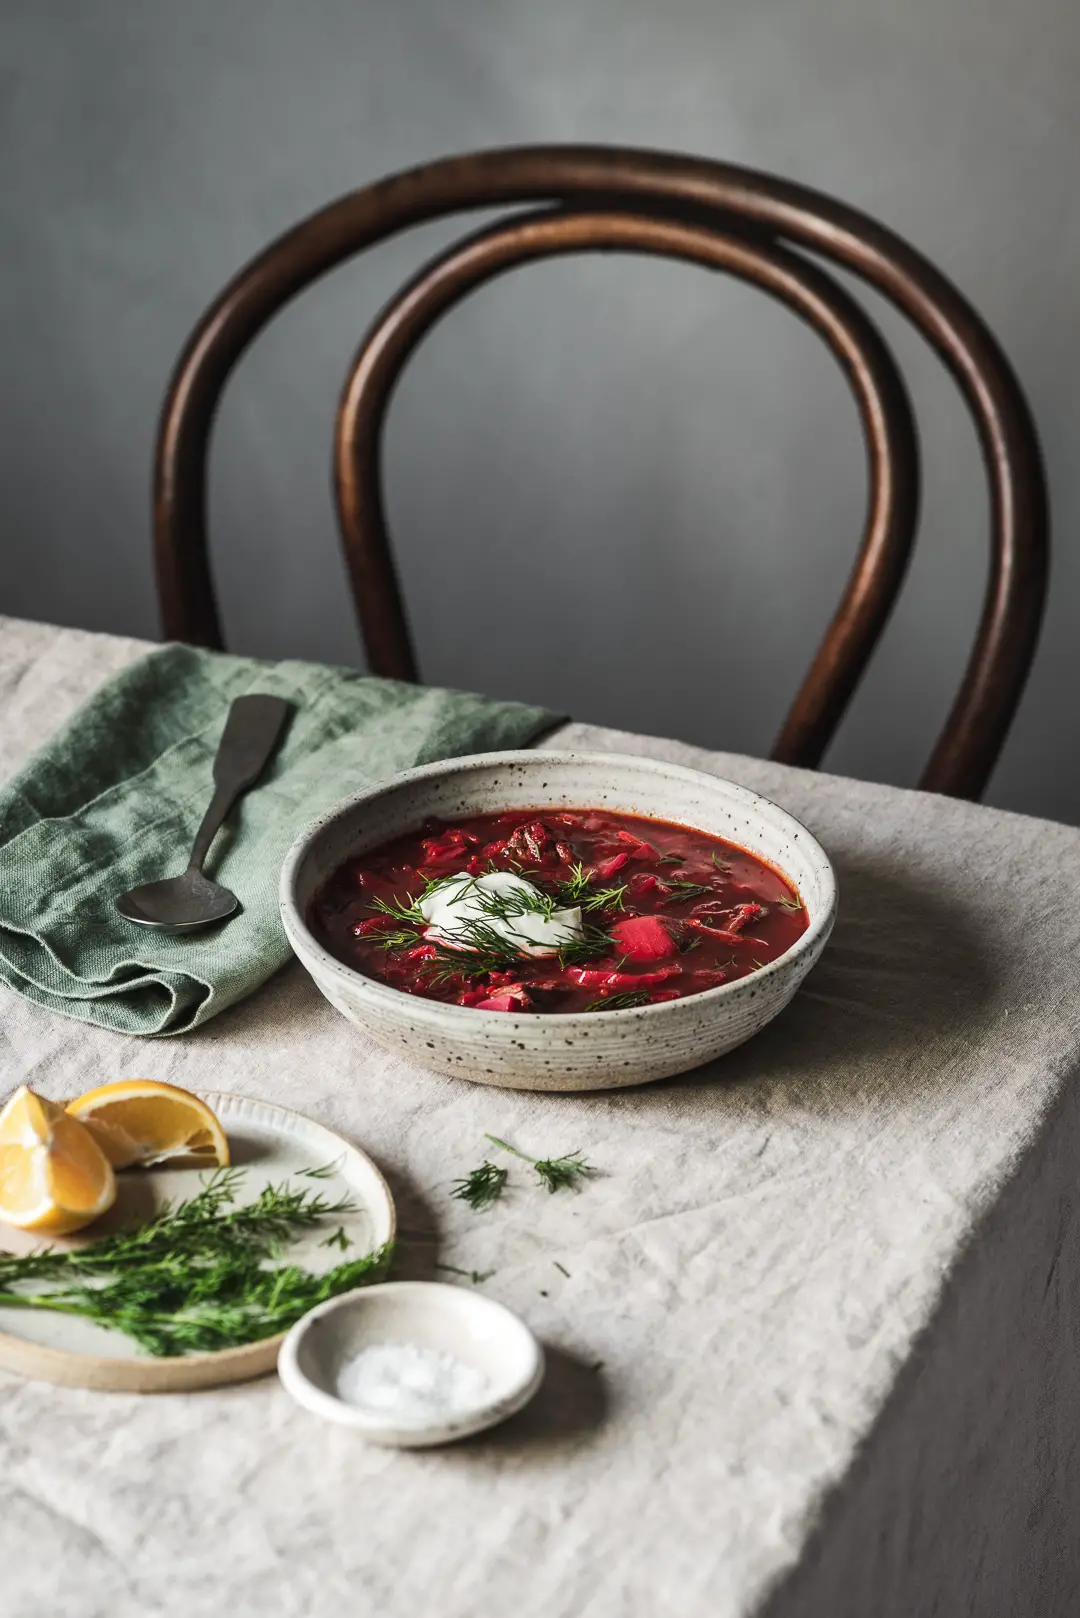 Hearty, rich, and perfectly balanced in flavor & texture: babushka Bronia's borscht is the ultimate comforting and nourishing soup